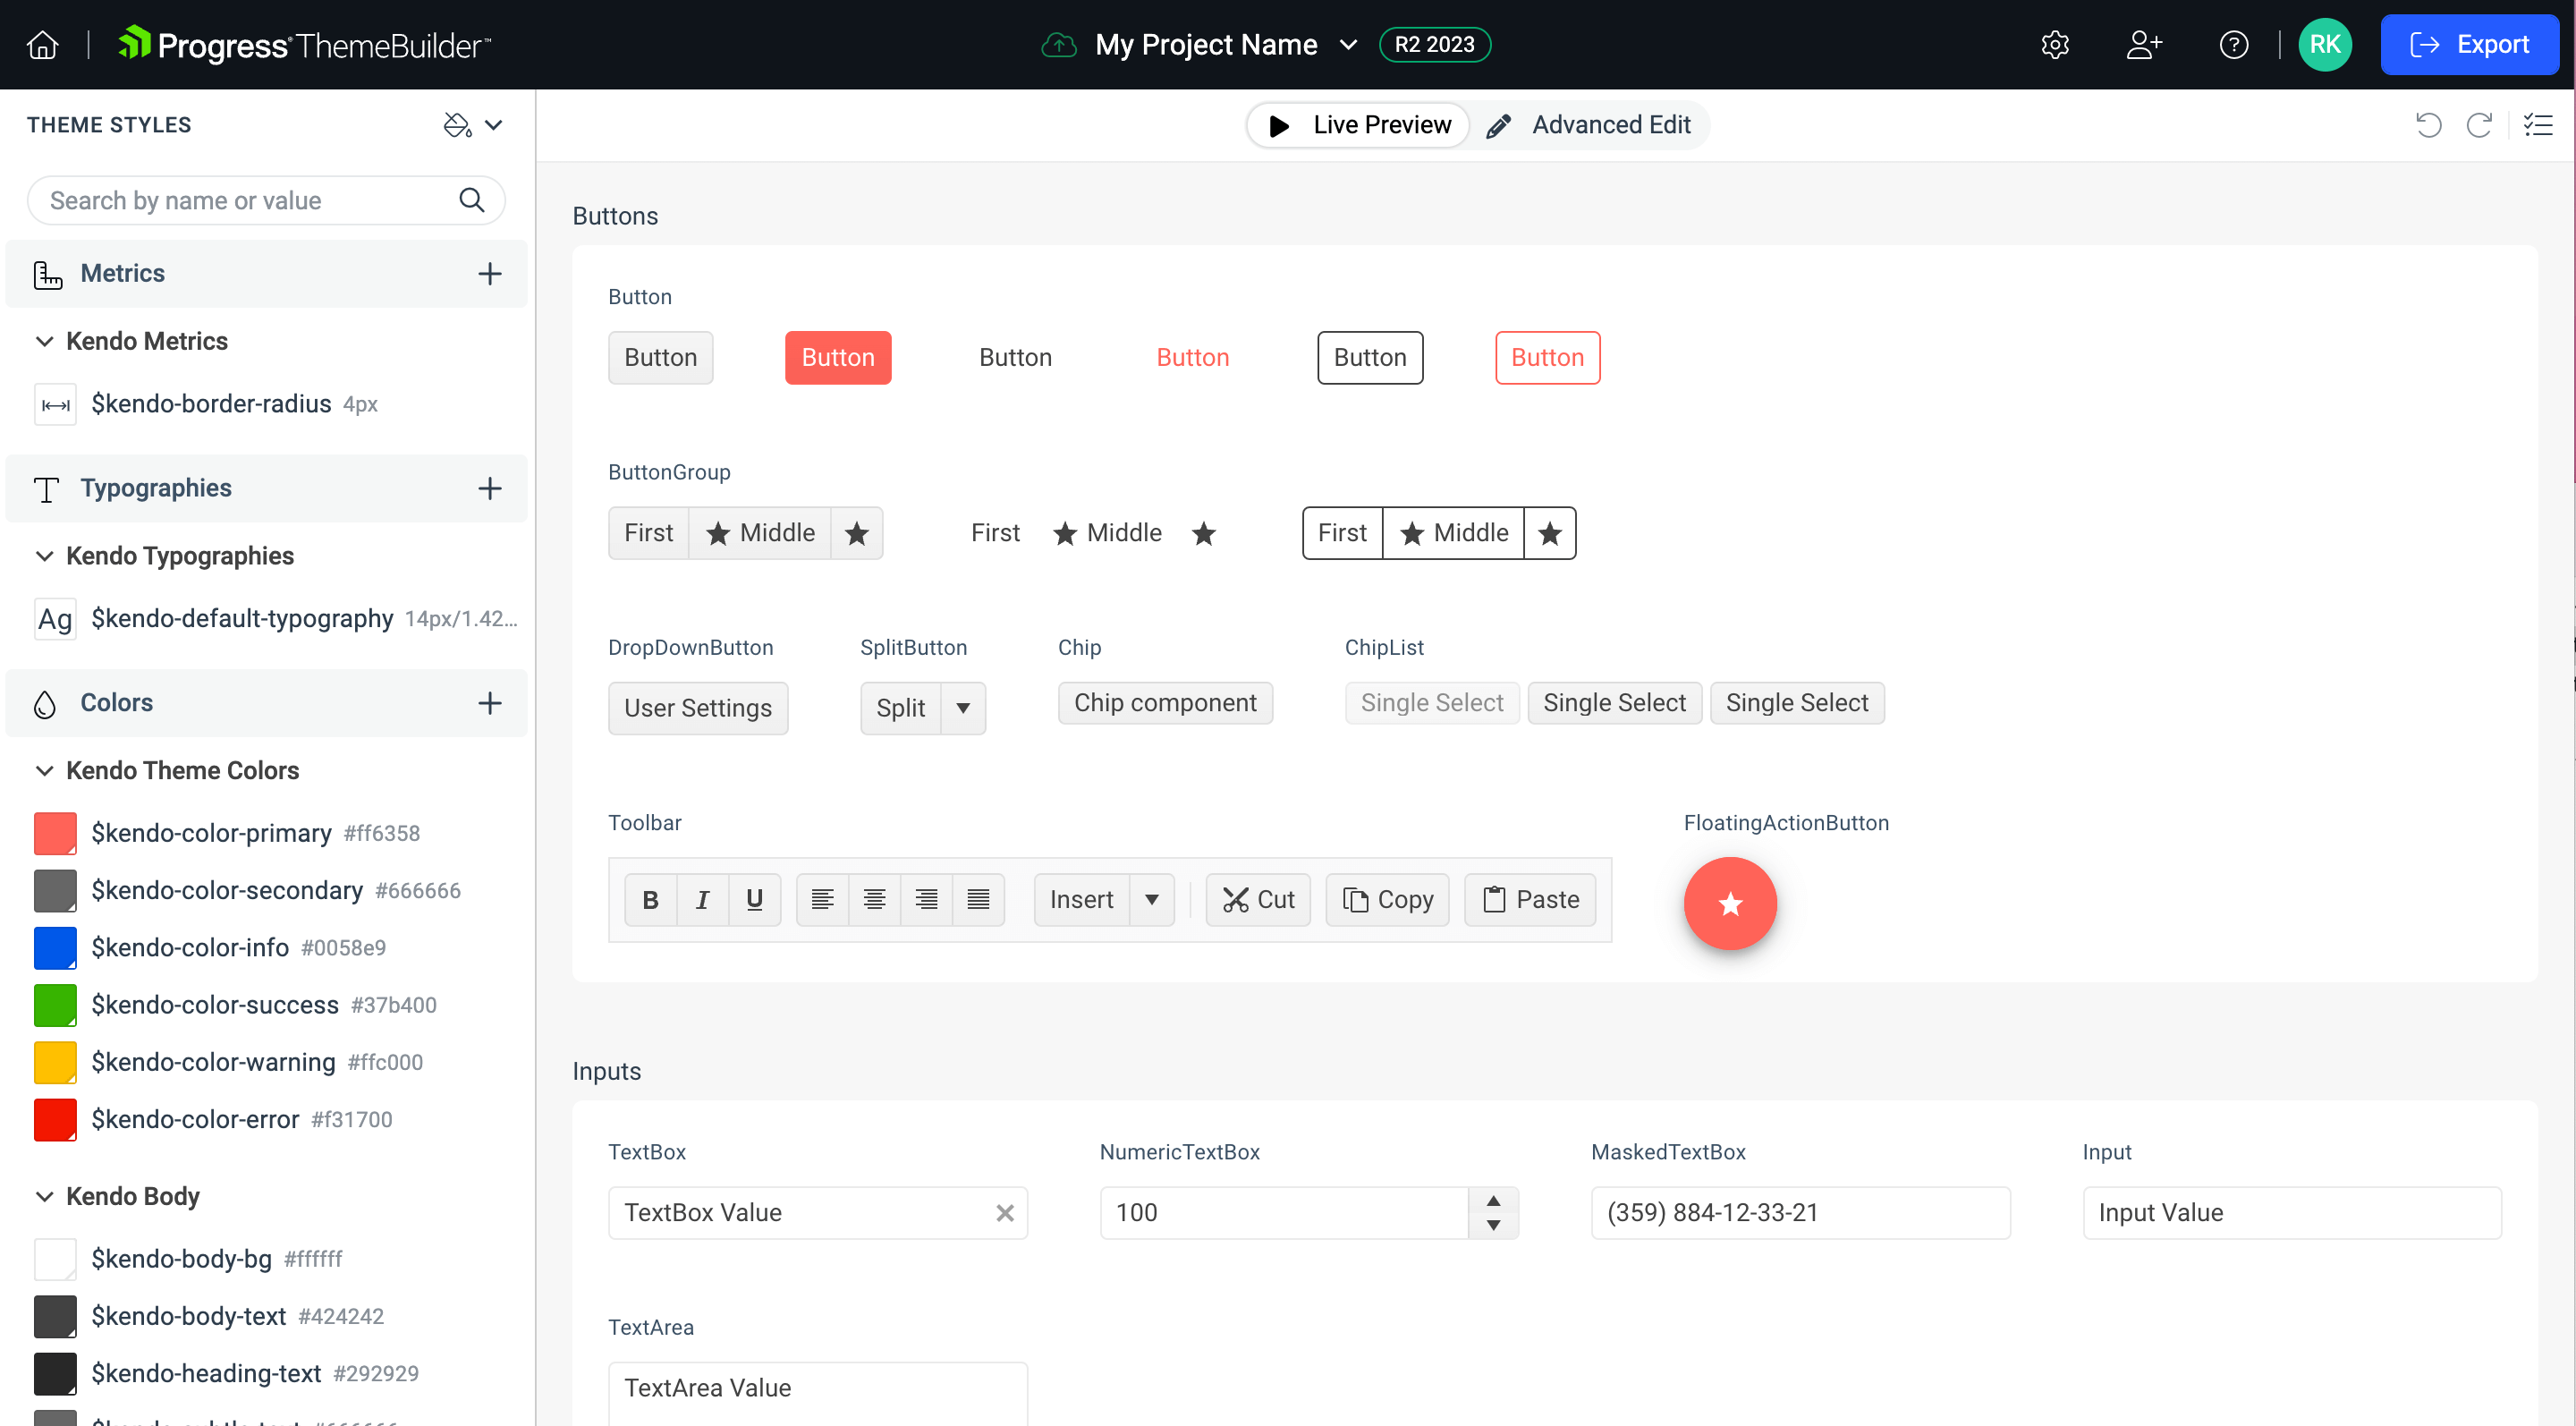 The initial project screen in ThemeBuilder